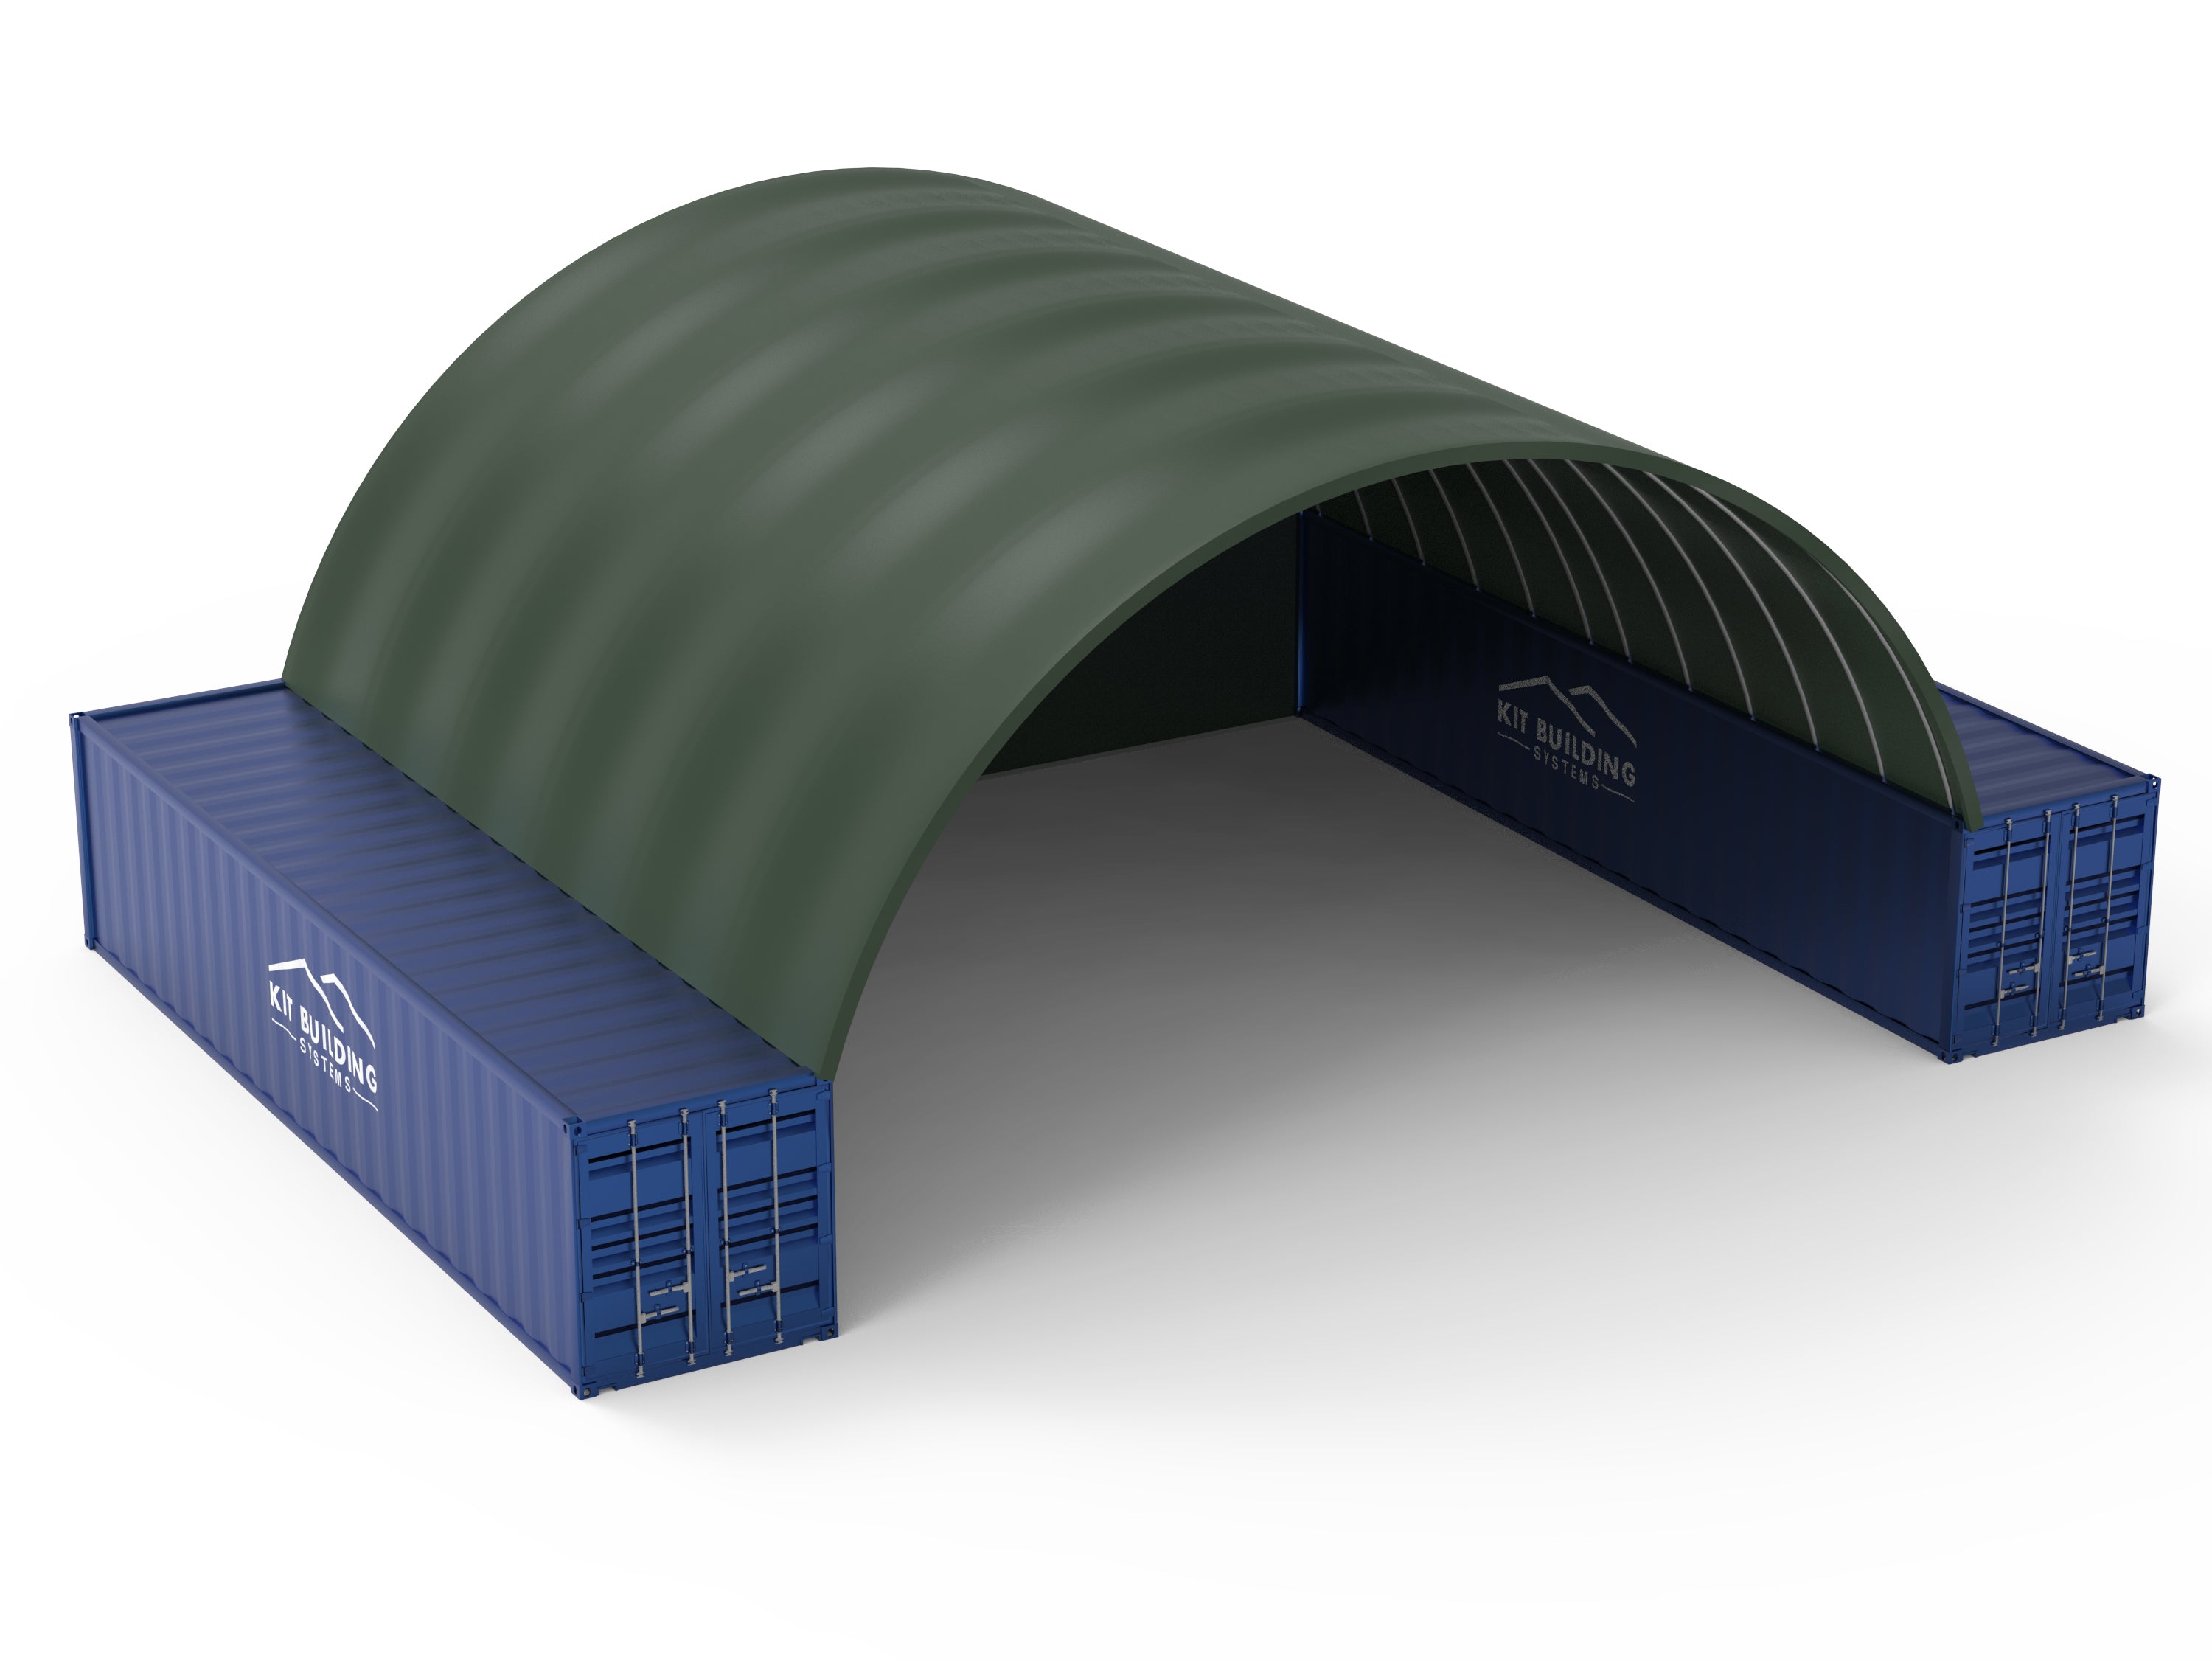 Container Shelter - 40ft x 40ft x 15ft (12m x 12m x 4.5m)